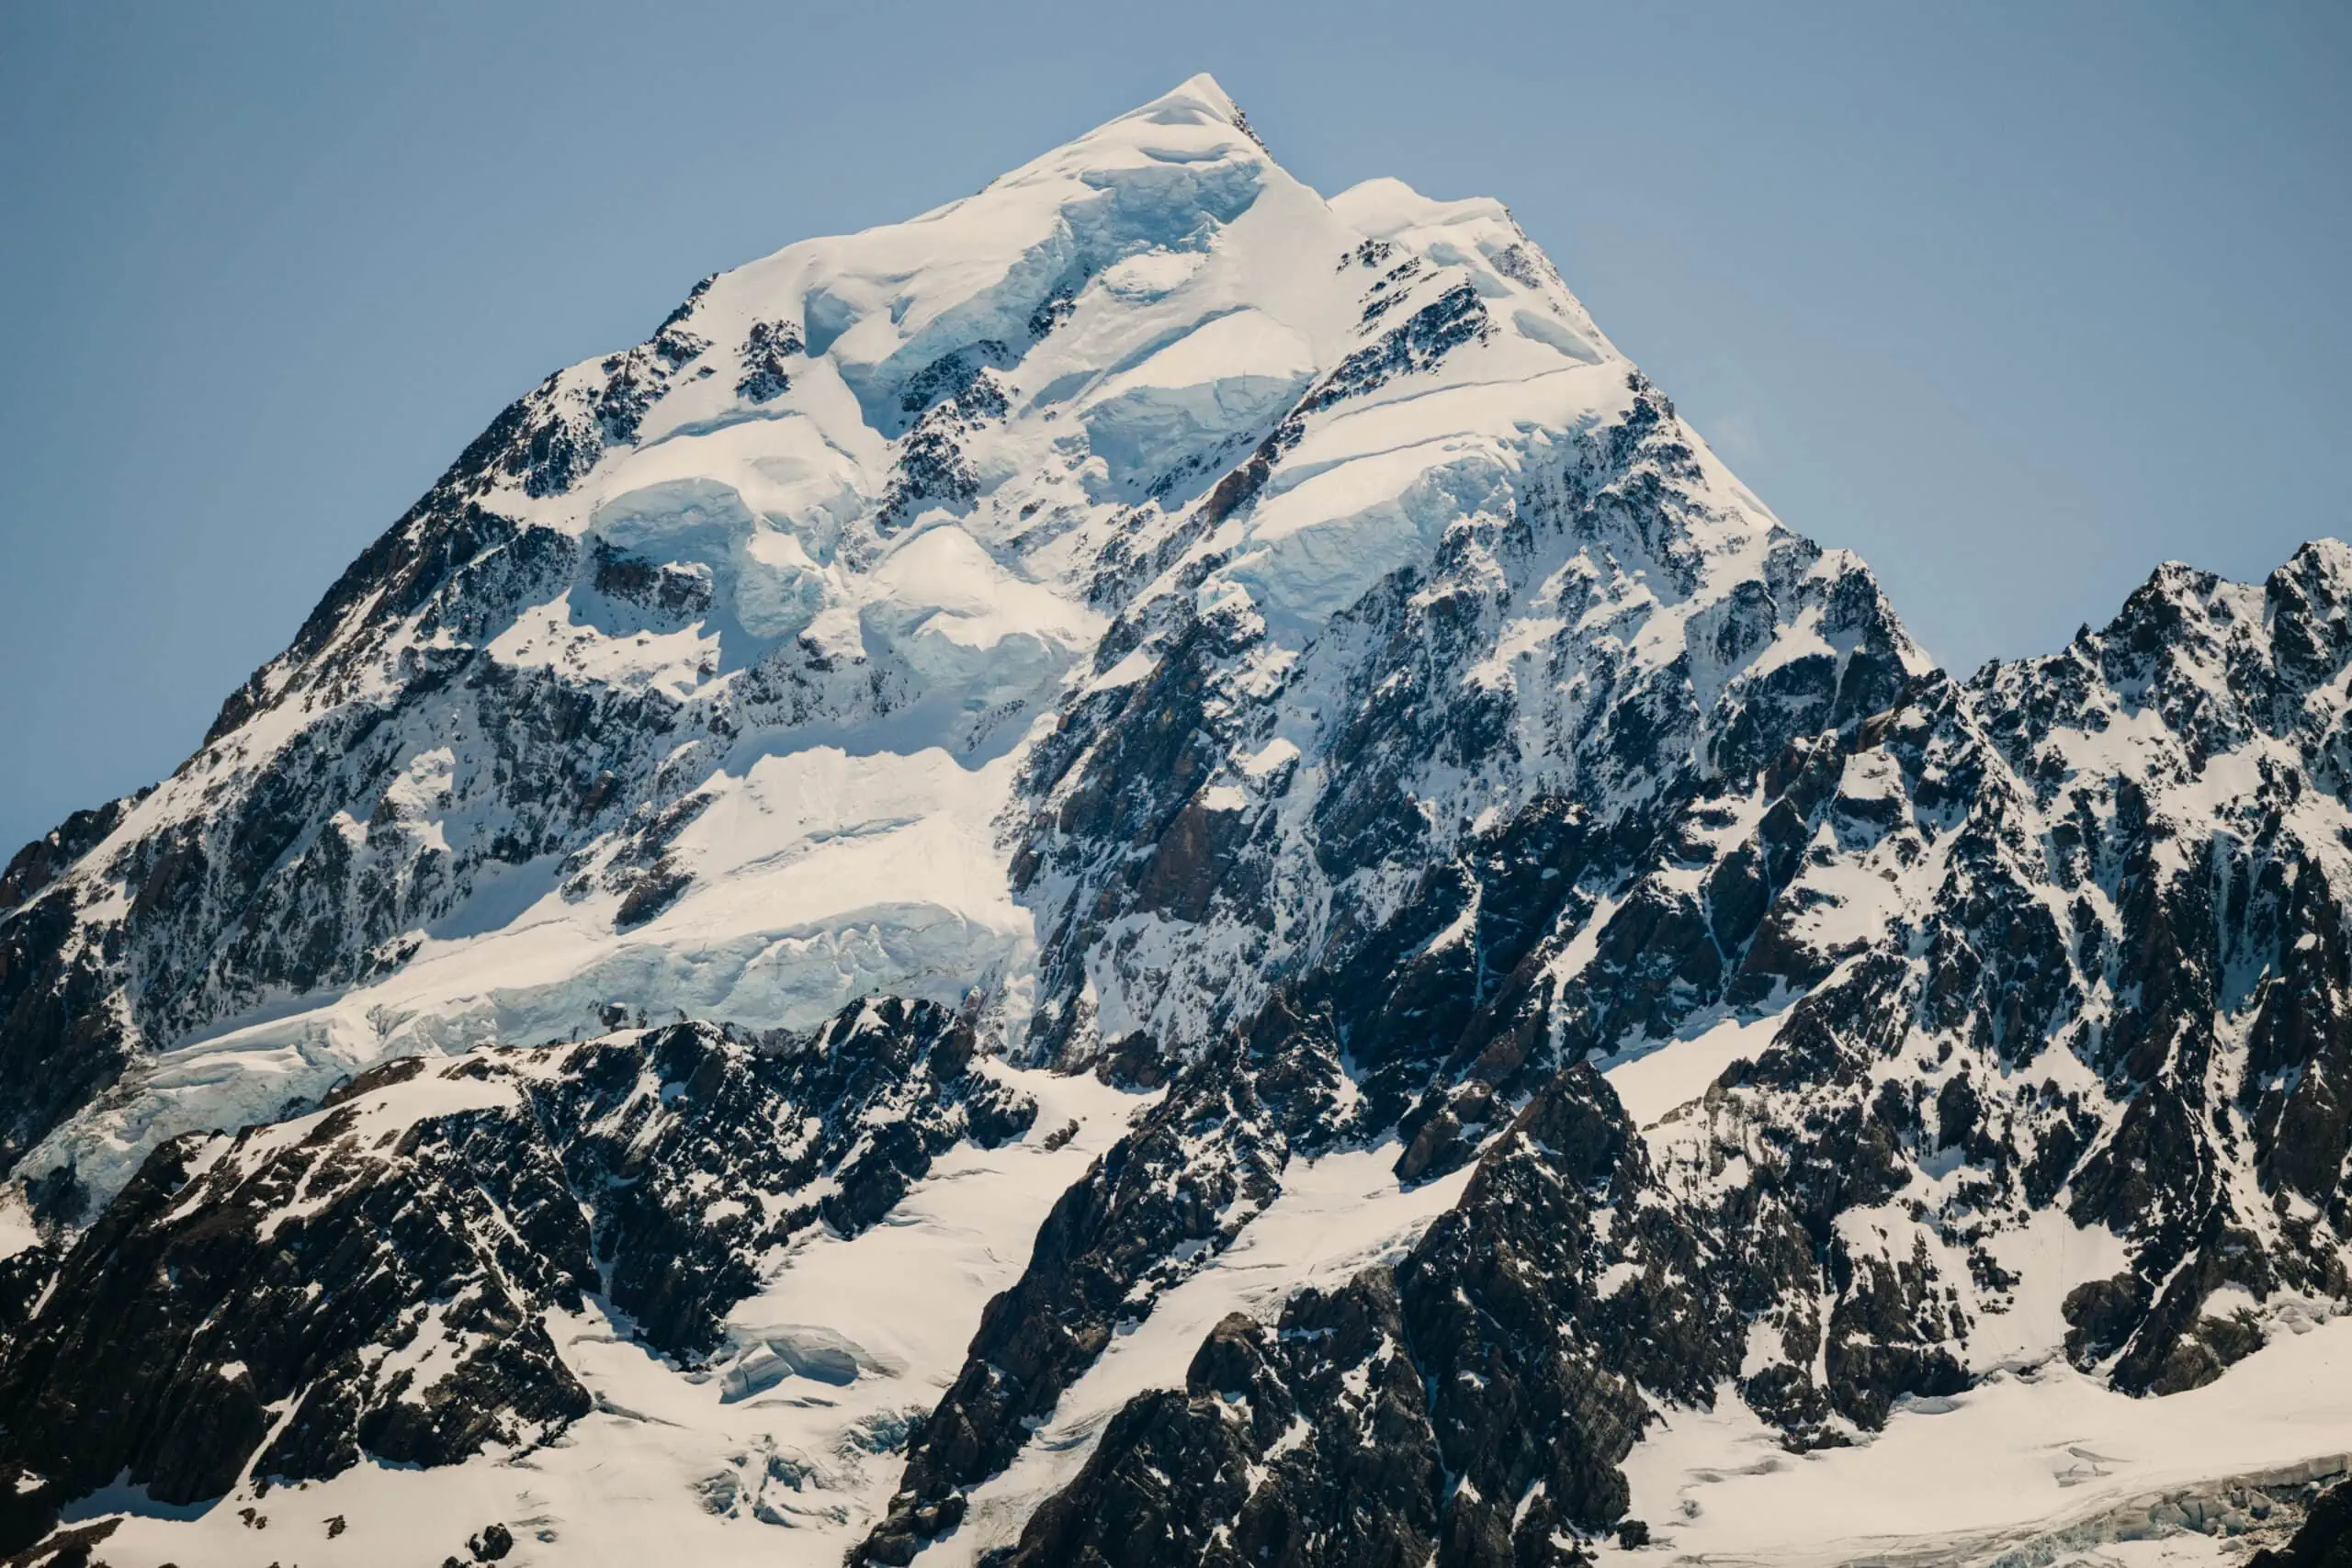 A clear view of the top of Mt Cook.